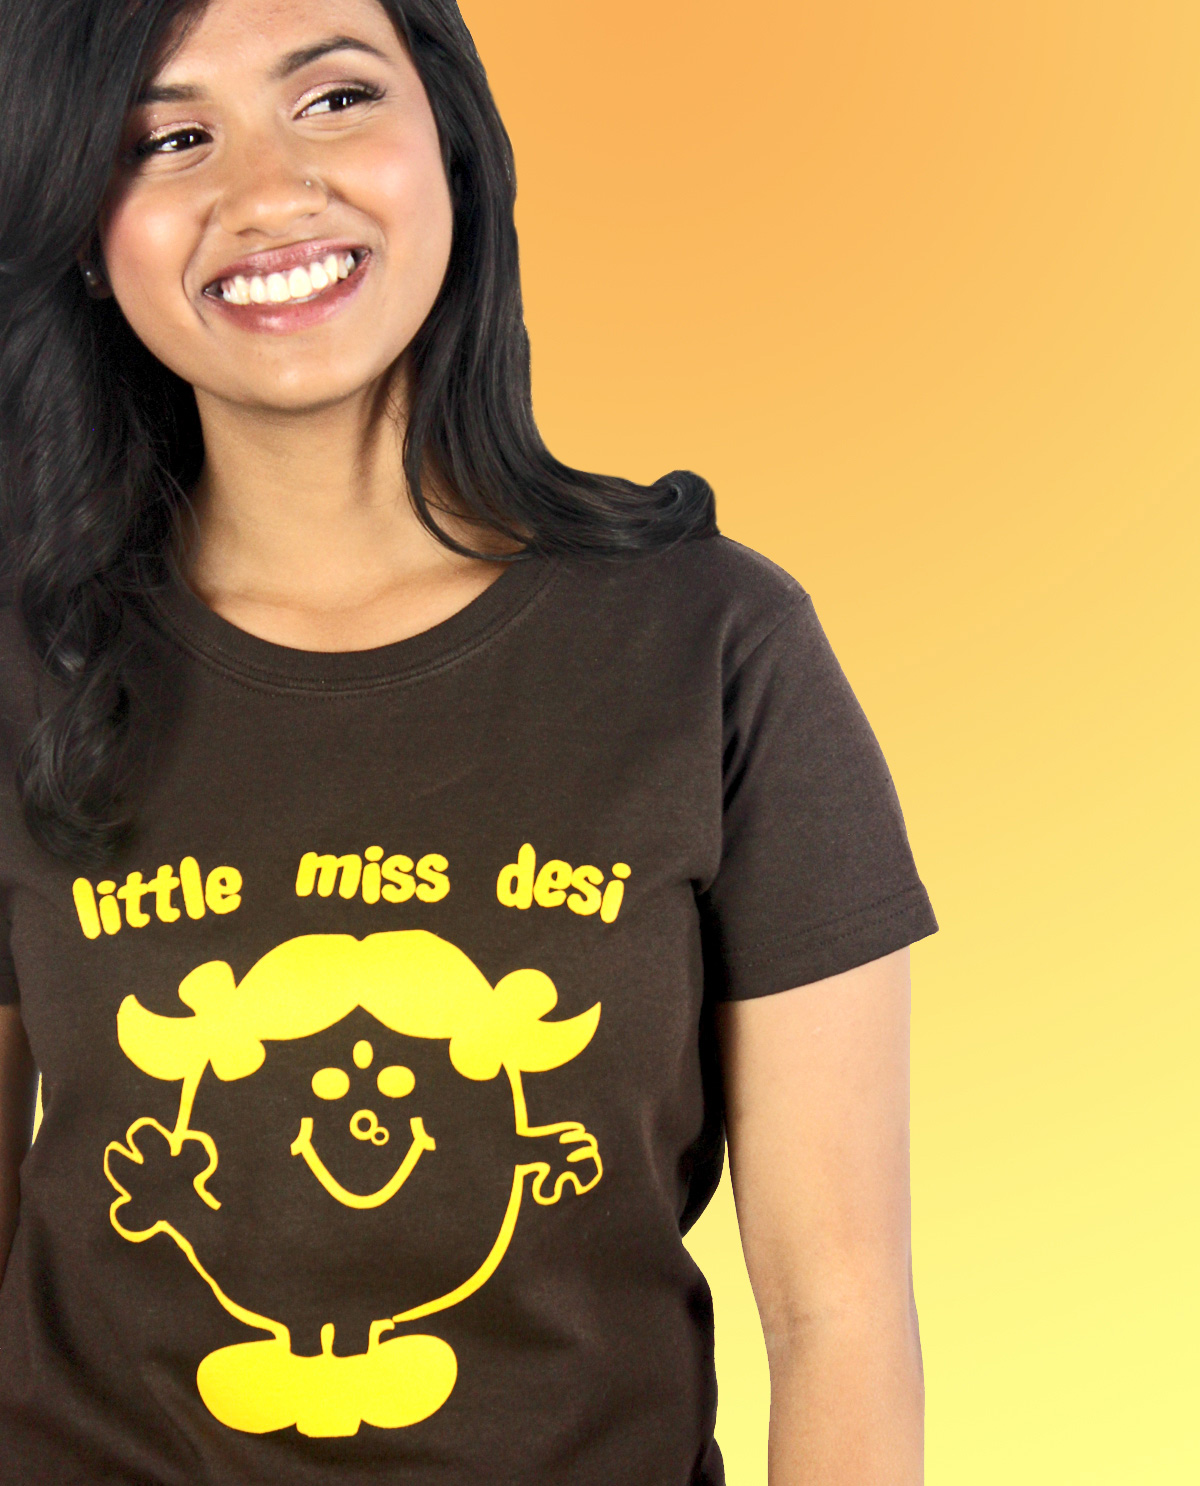 South Asian Female Model wearing Graphic Design T.shirt with Little Miss Desi graphic design on front.